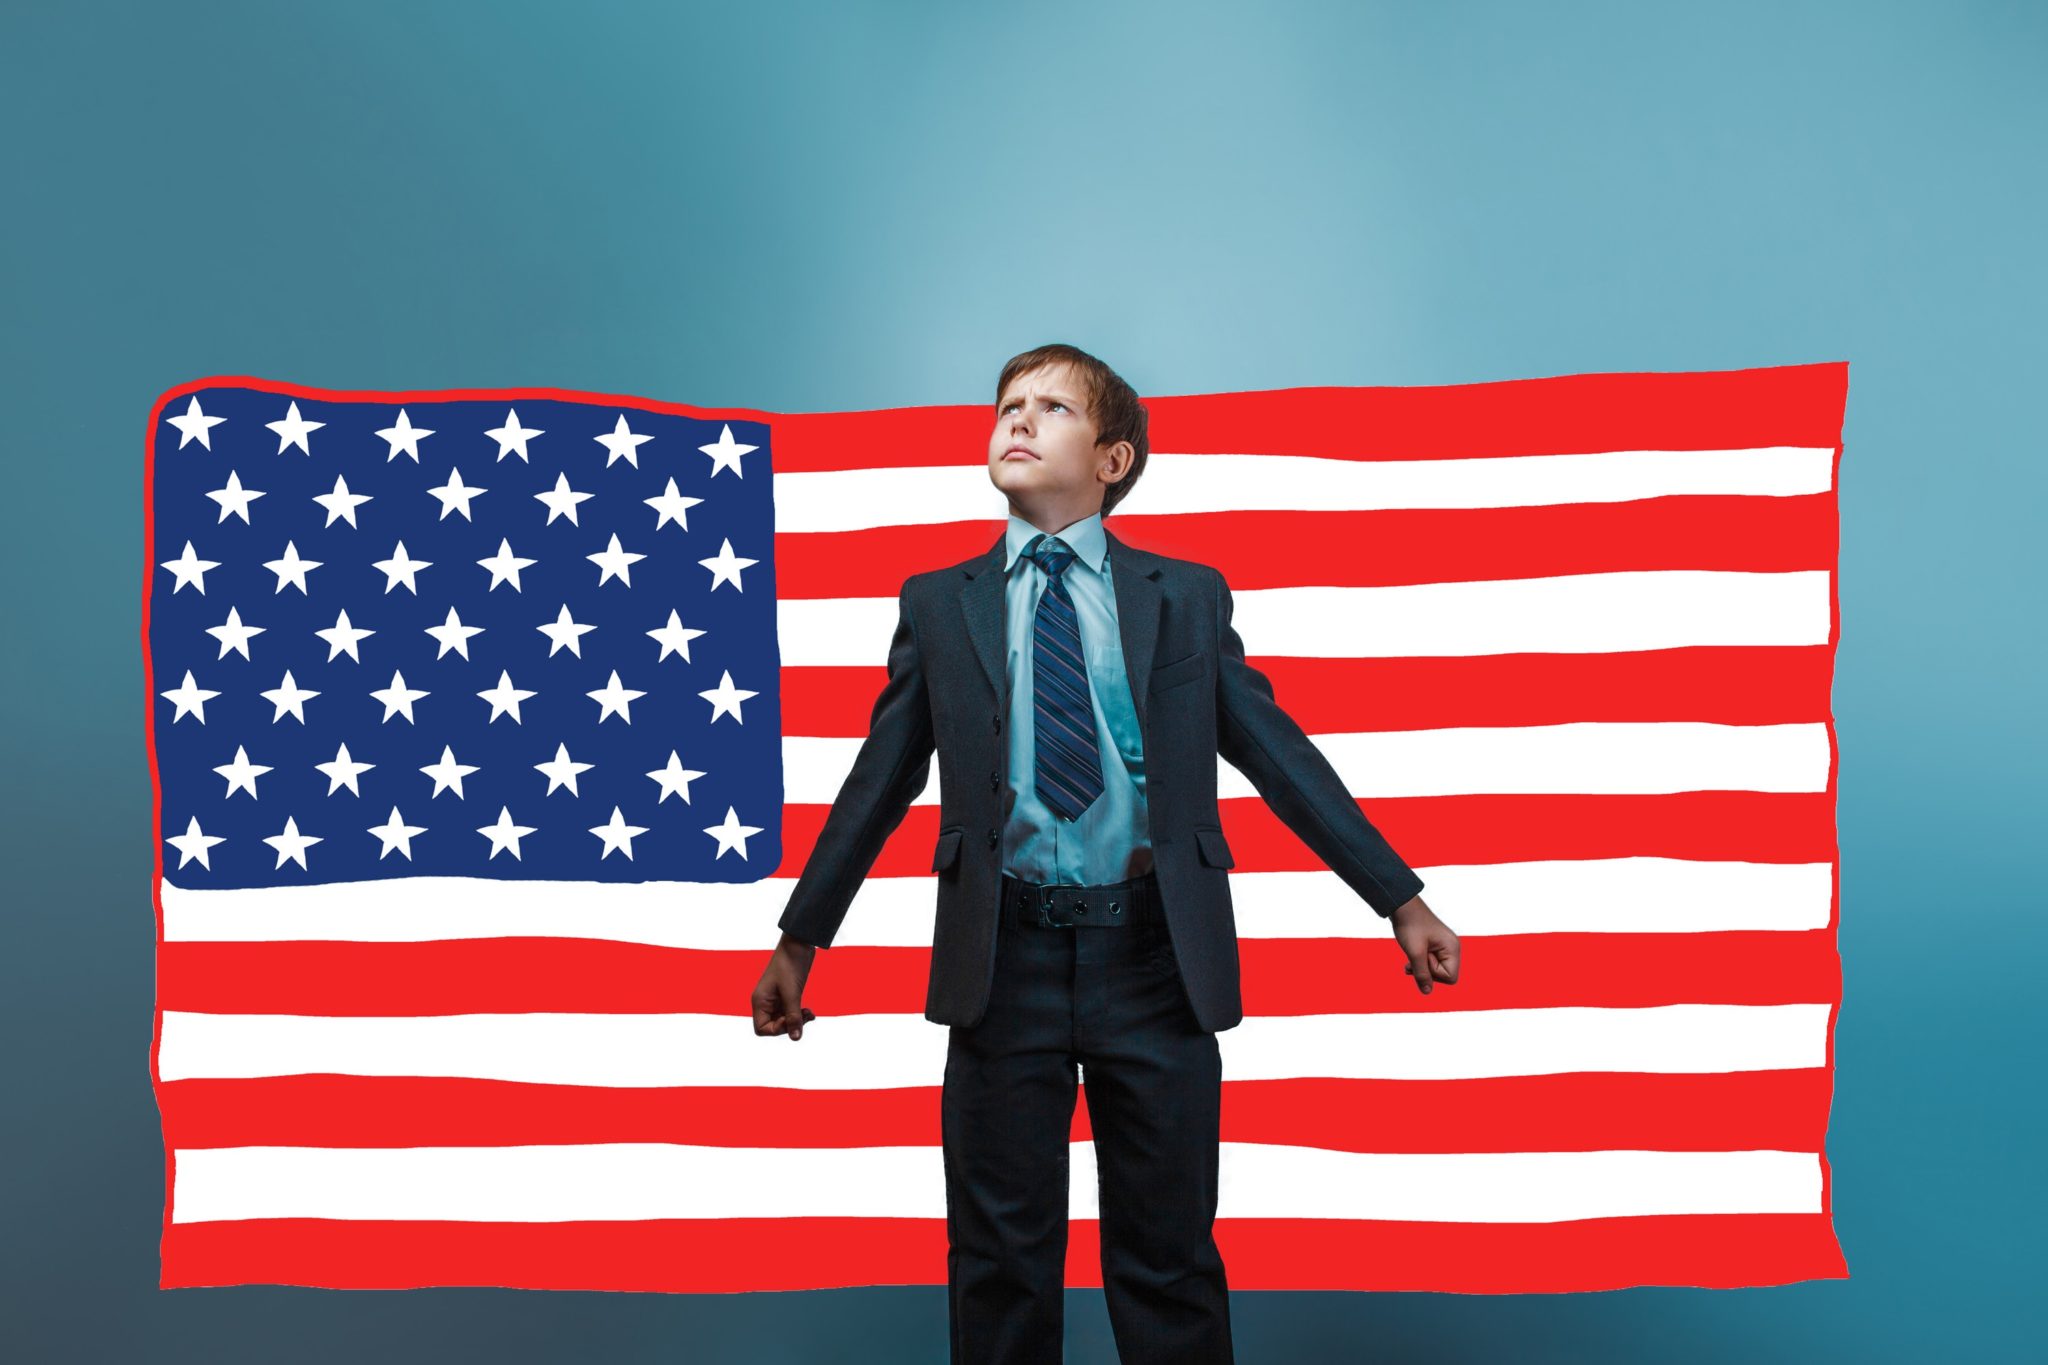 Image of a young child dressed in business suit looking authoritarian while standing in front of American flag backdrop